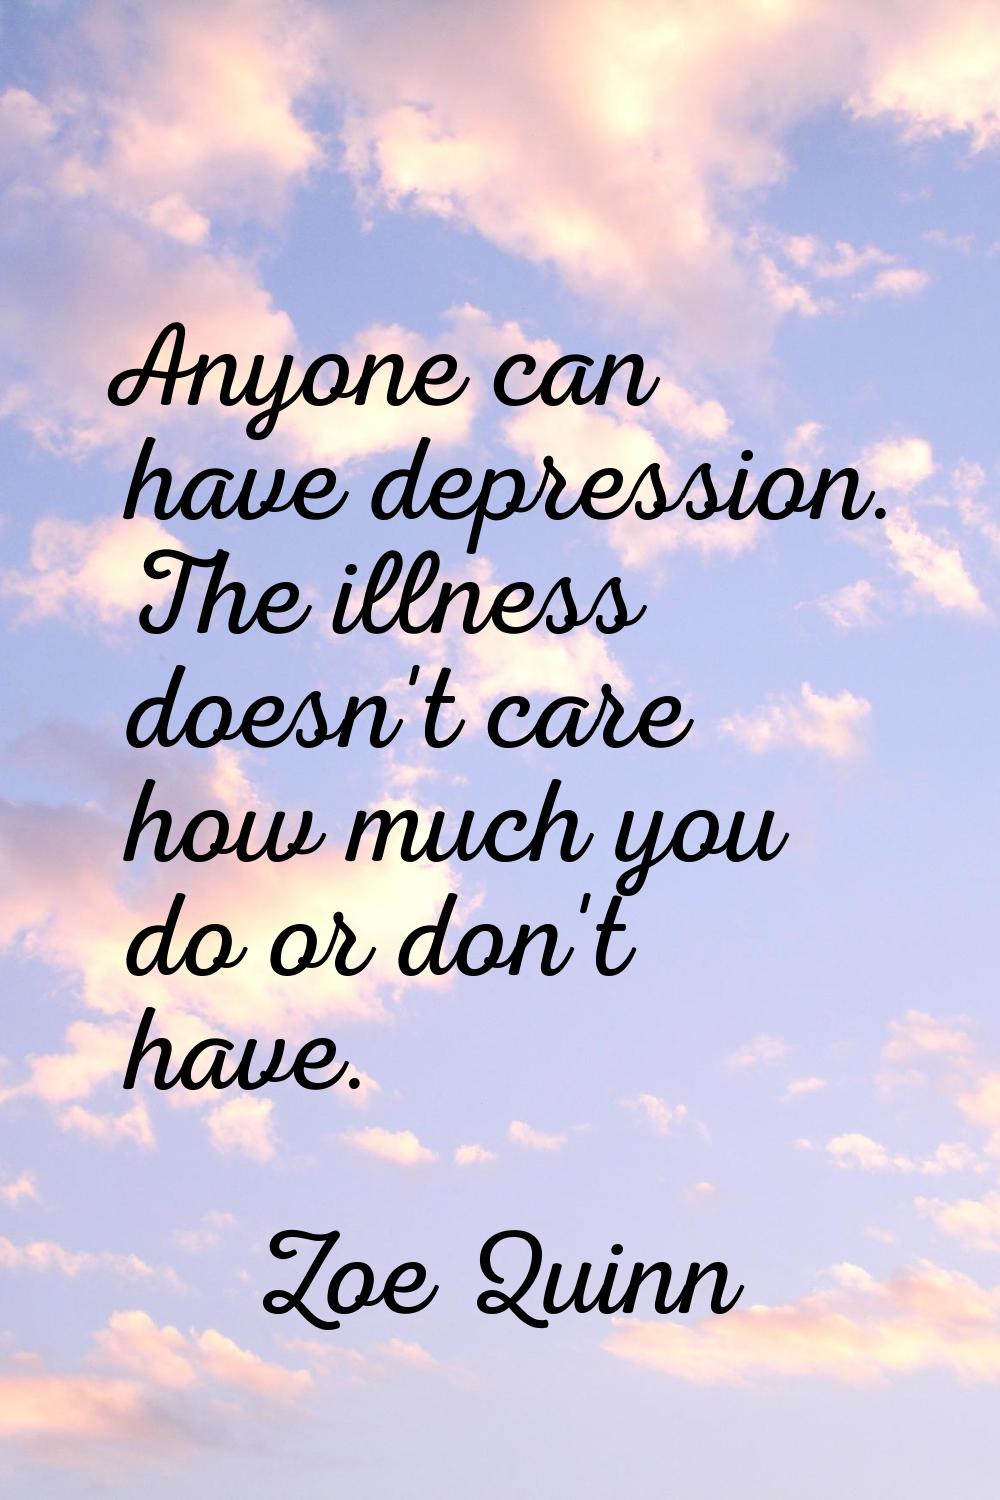 Anyone can have depression. The illness doesn't care how much you do or don't have.